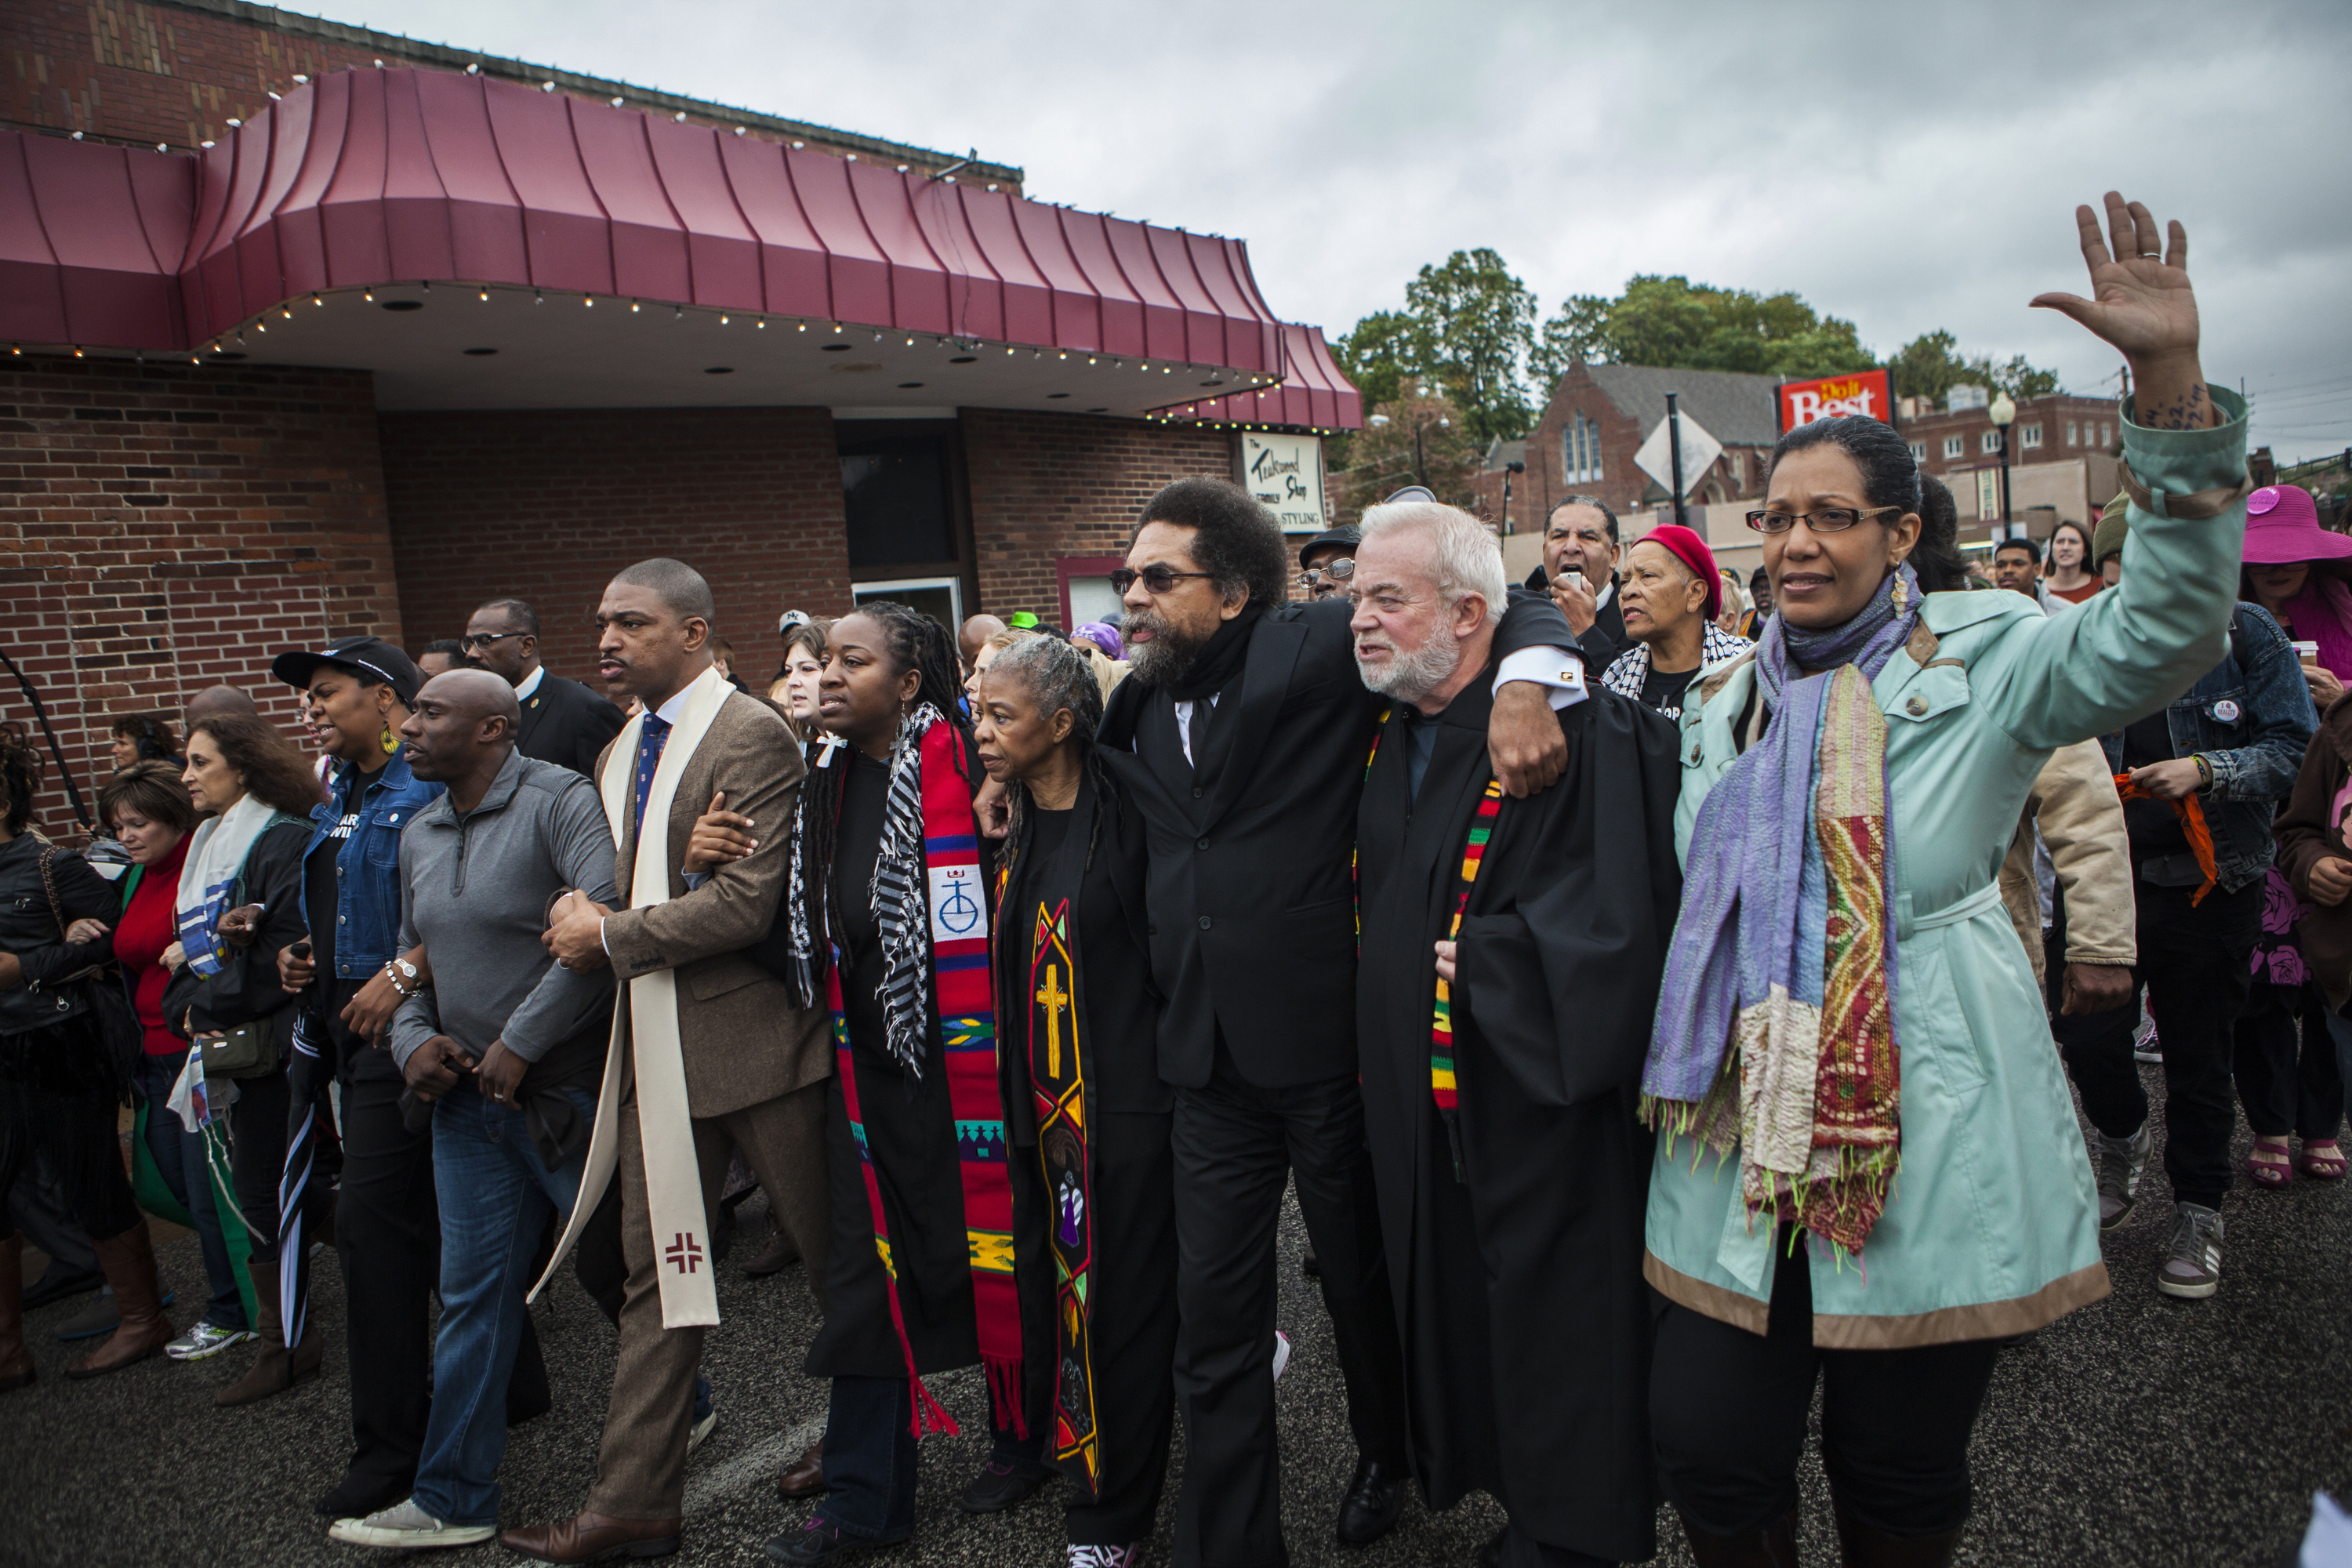 Clergy members lead hundreds of protestors march from Wellspring Church to the Ferguson police station in an act of civil disobedience on October 13, 2014 in Ferguson, Missouri. (Anadolu Agency&mdash;Getty Images)